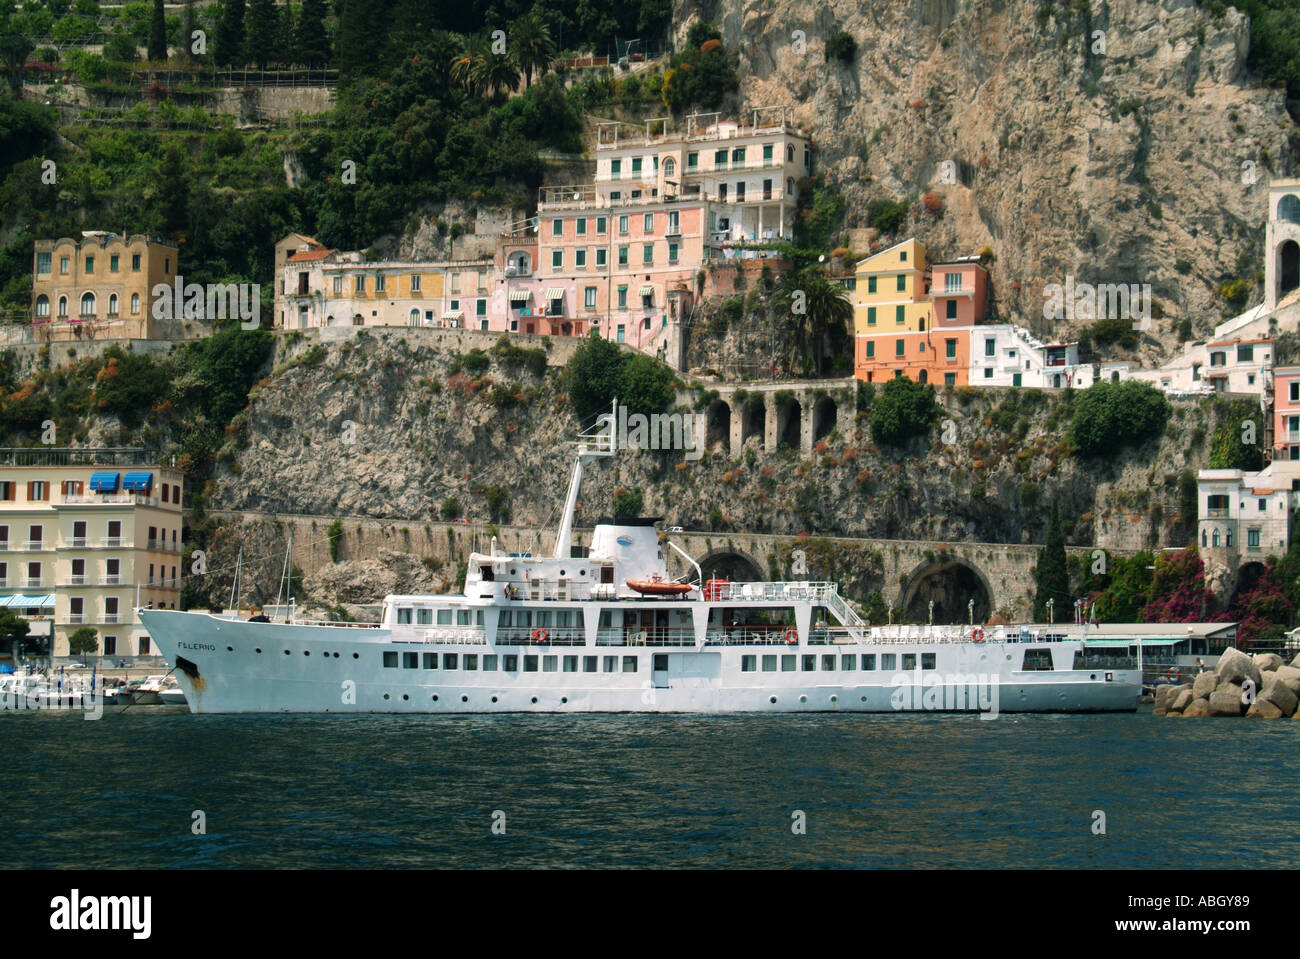 Amalfi town waterfront anchored sightseeing tour boat named Falerno in front of UNESCO coastline & cliff face buildings at Salerno Campania Italy EU Stock Photo